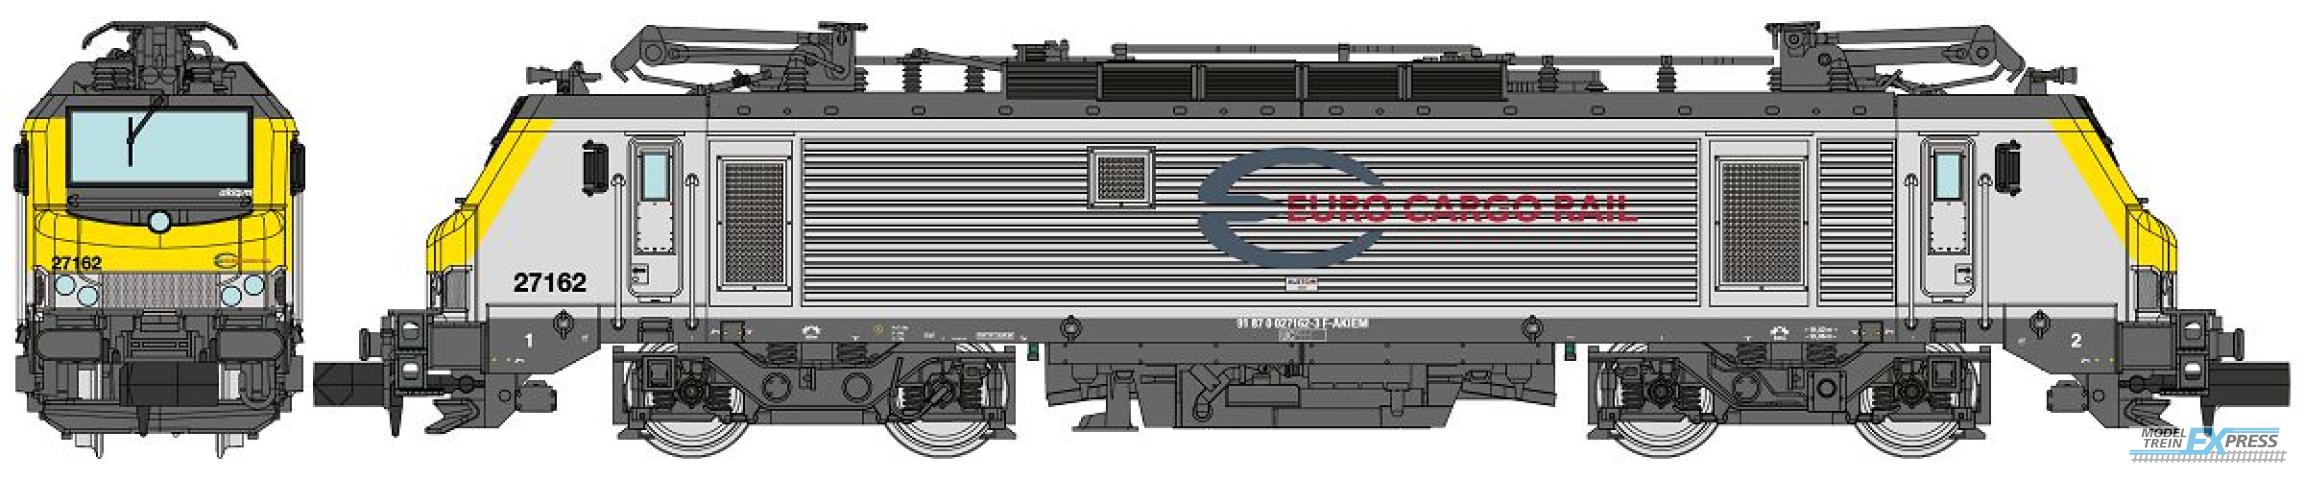 REE models NW-298 Electric locomotive BB 27162, EURO CARGO RAILlivery, SNCF Ep.VI